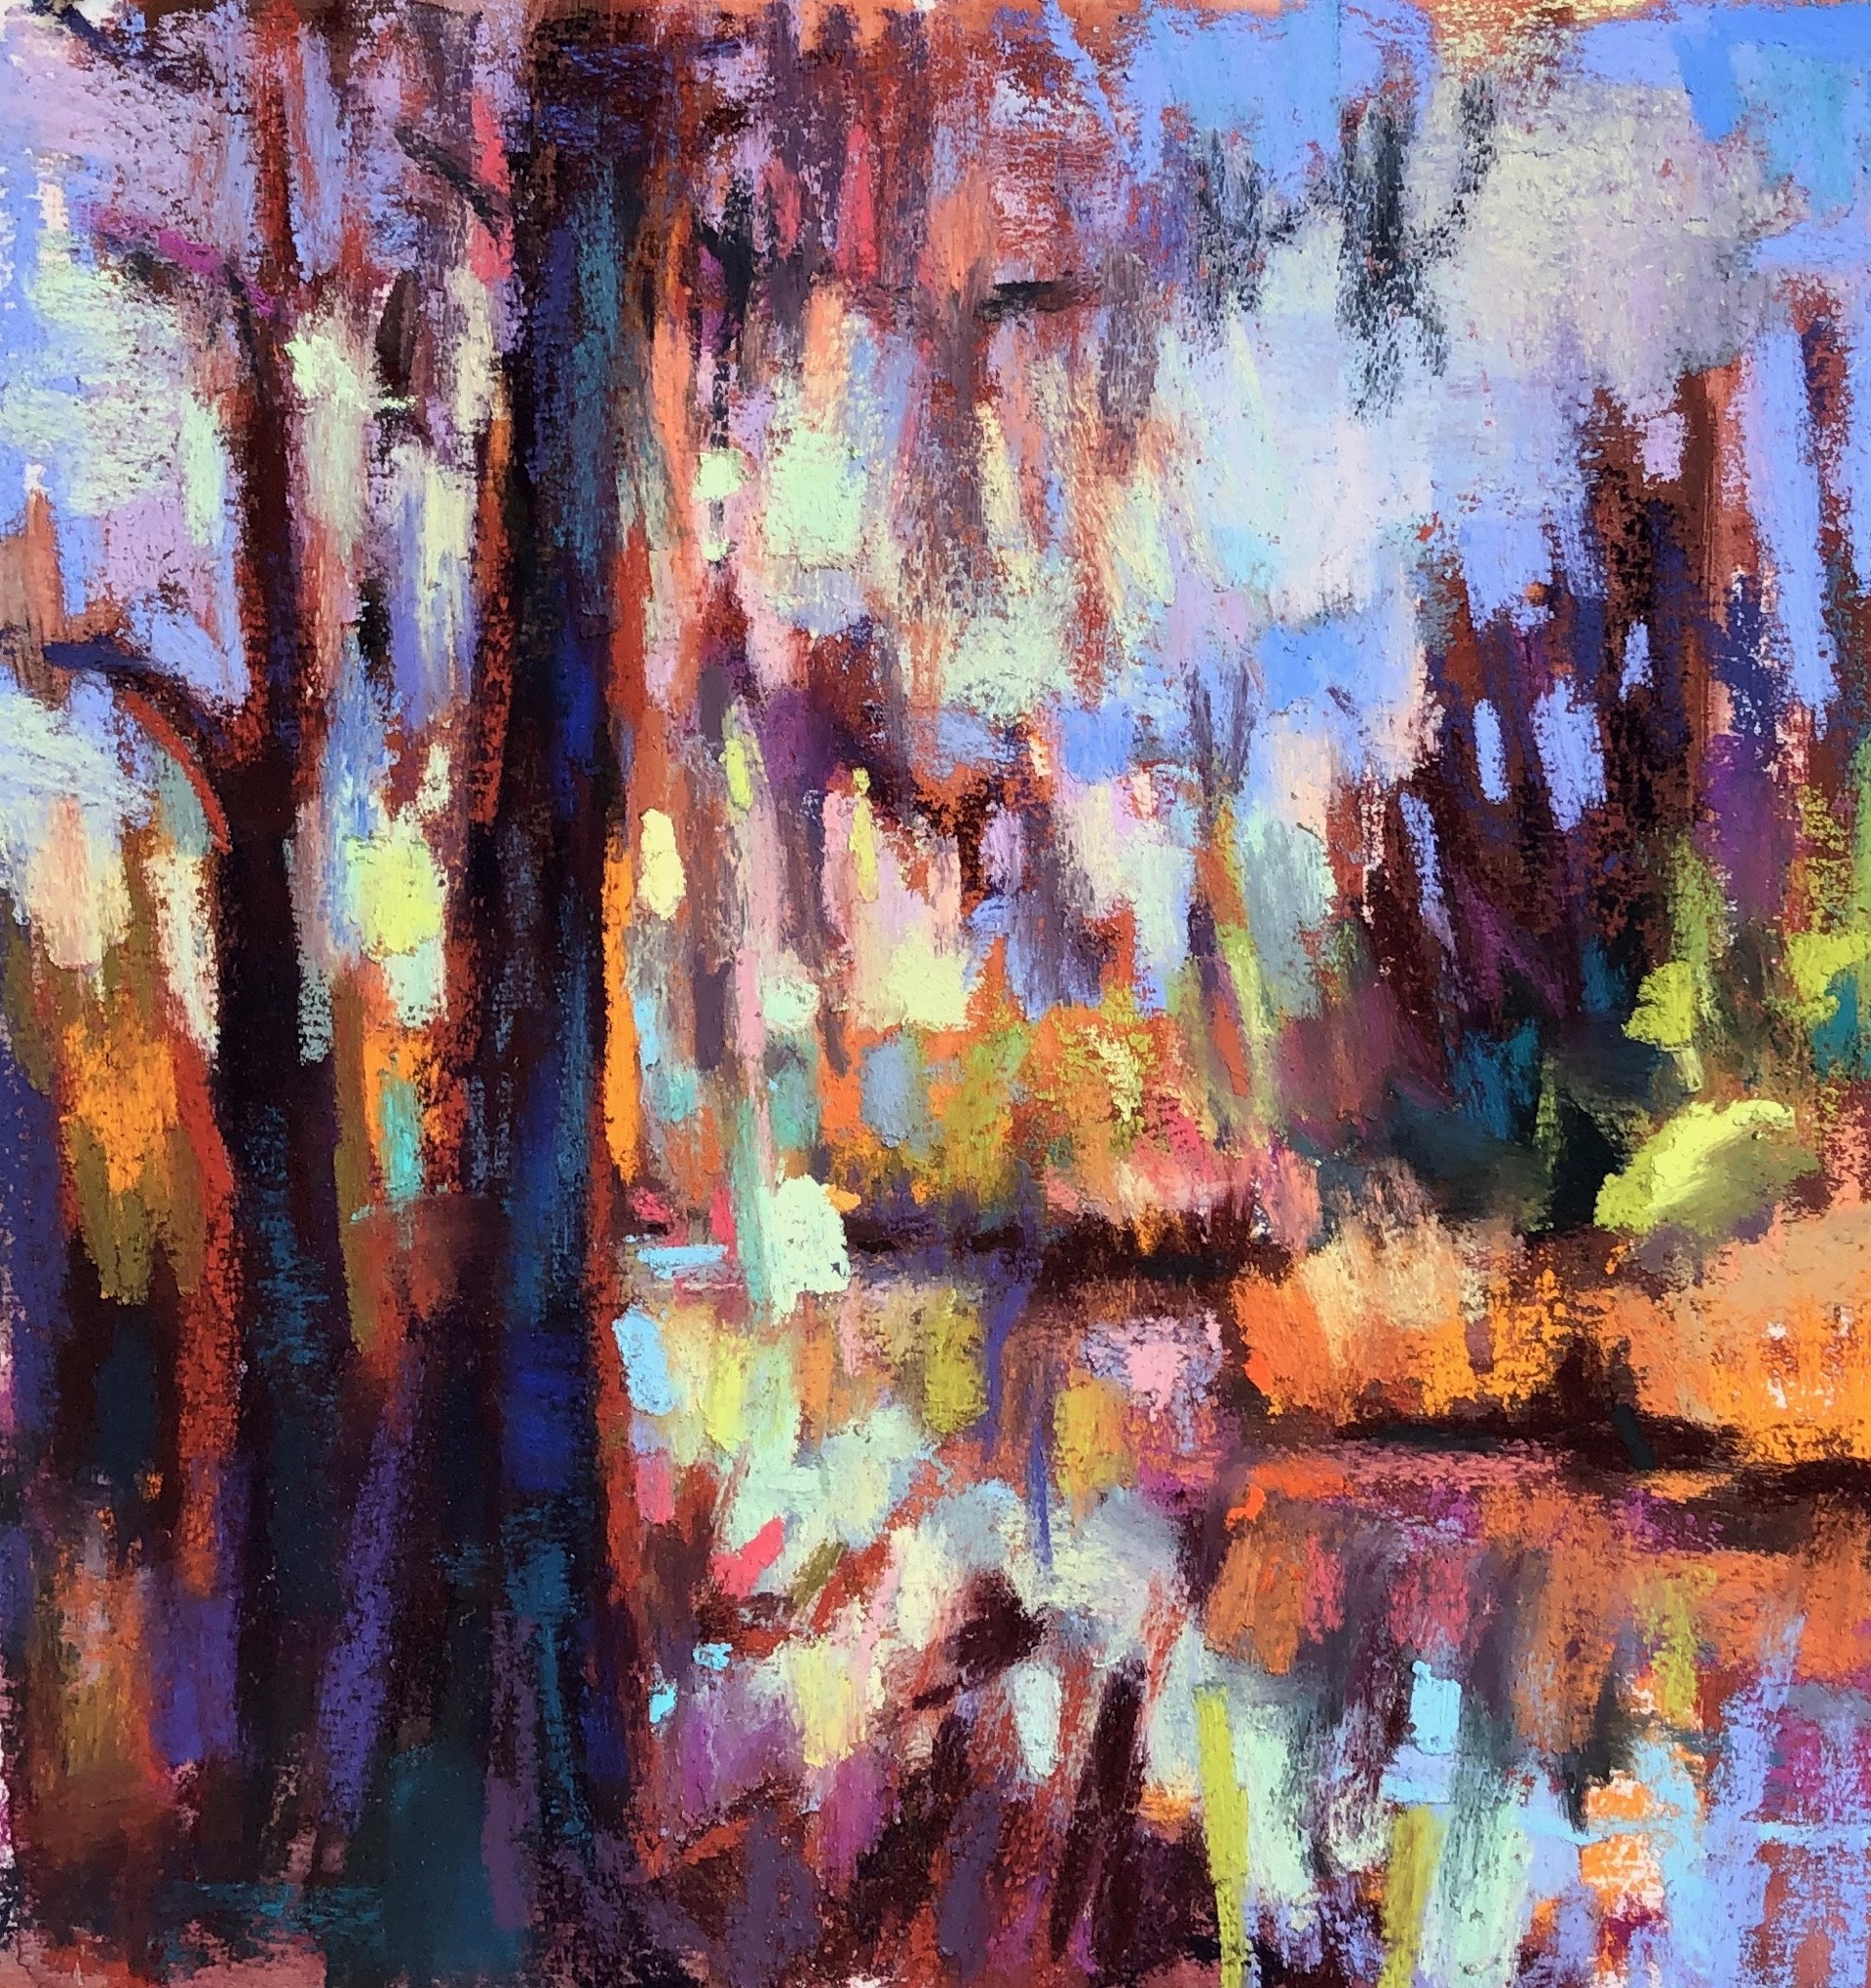 Swamp in Early Spring by Susan Mayfield